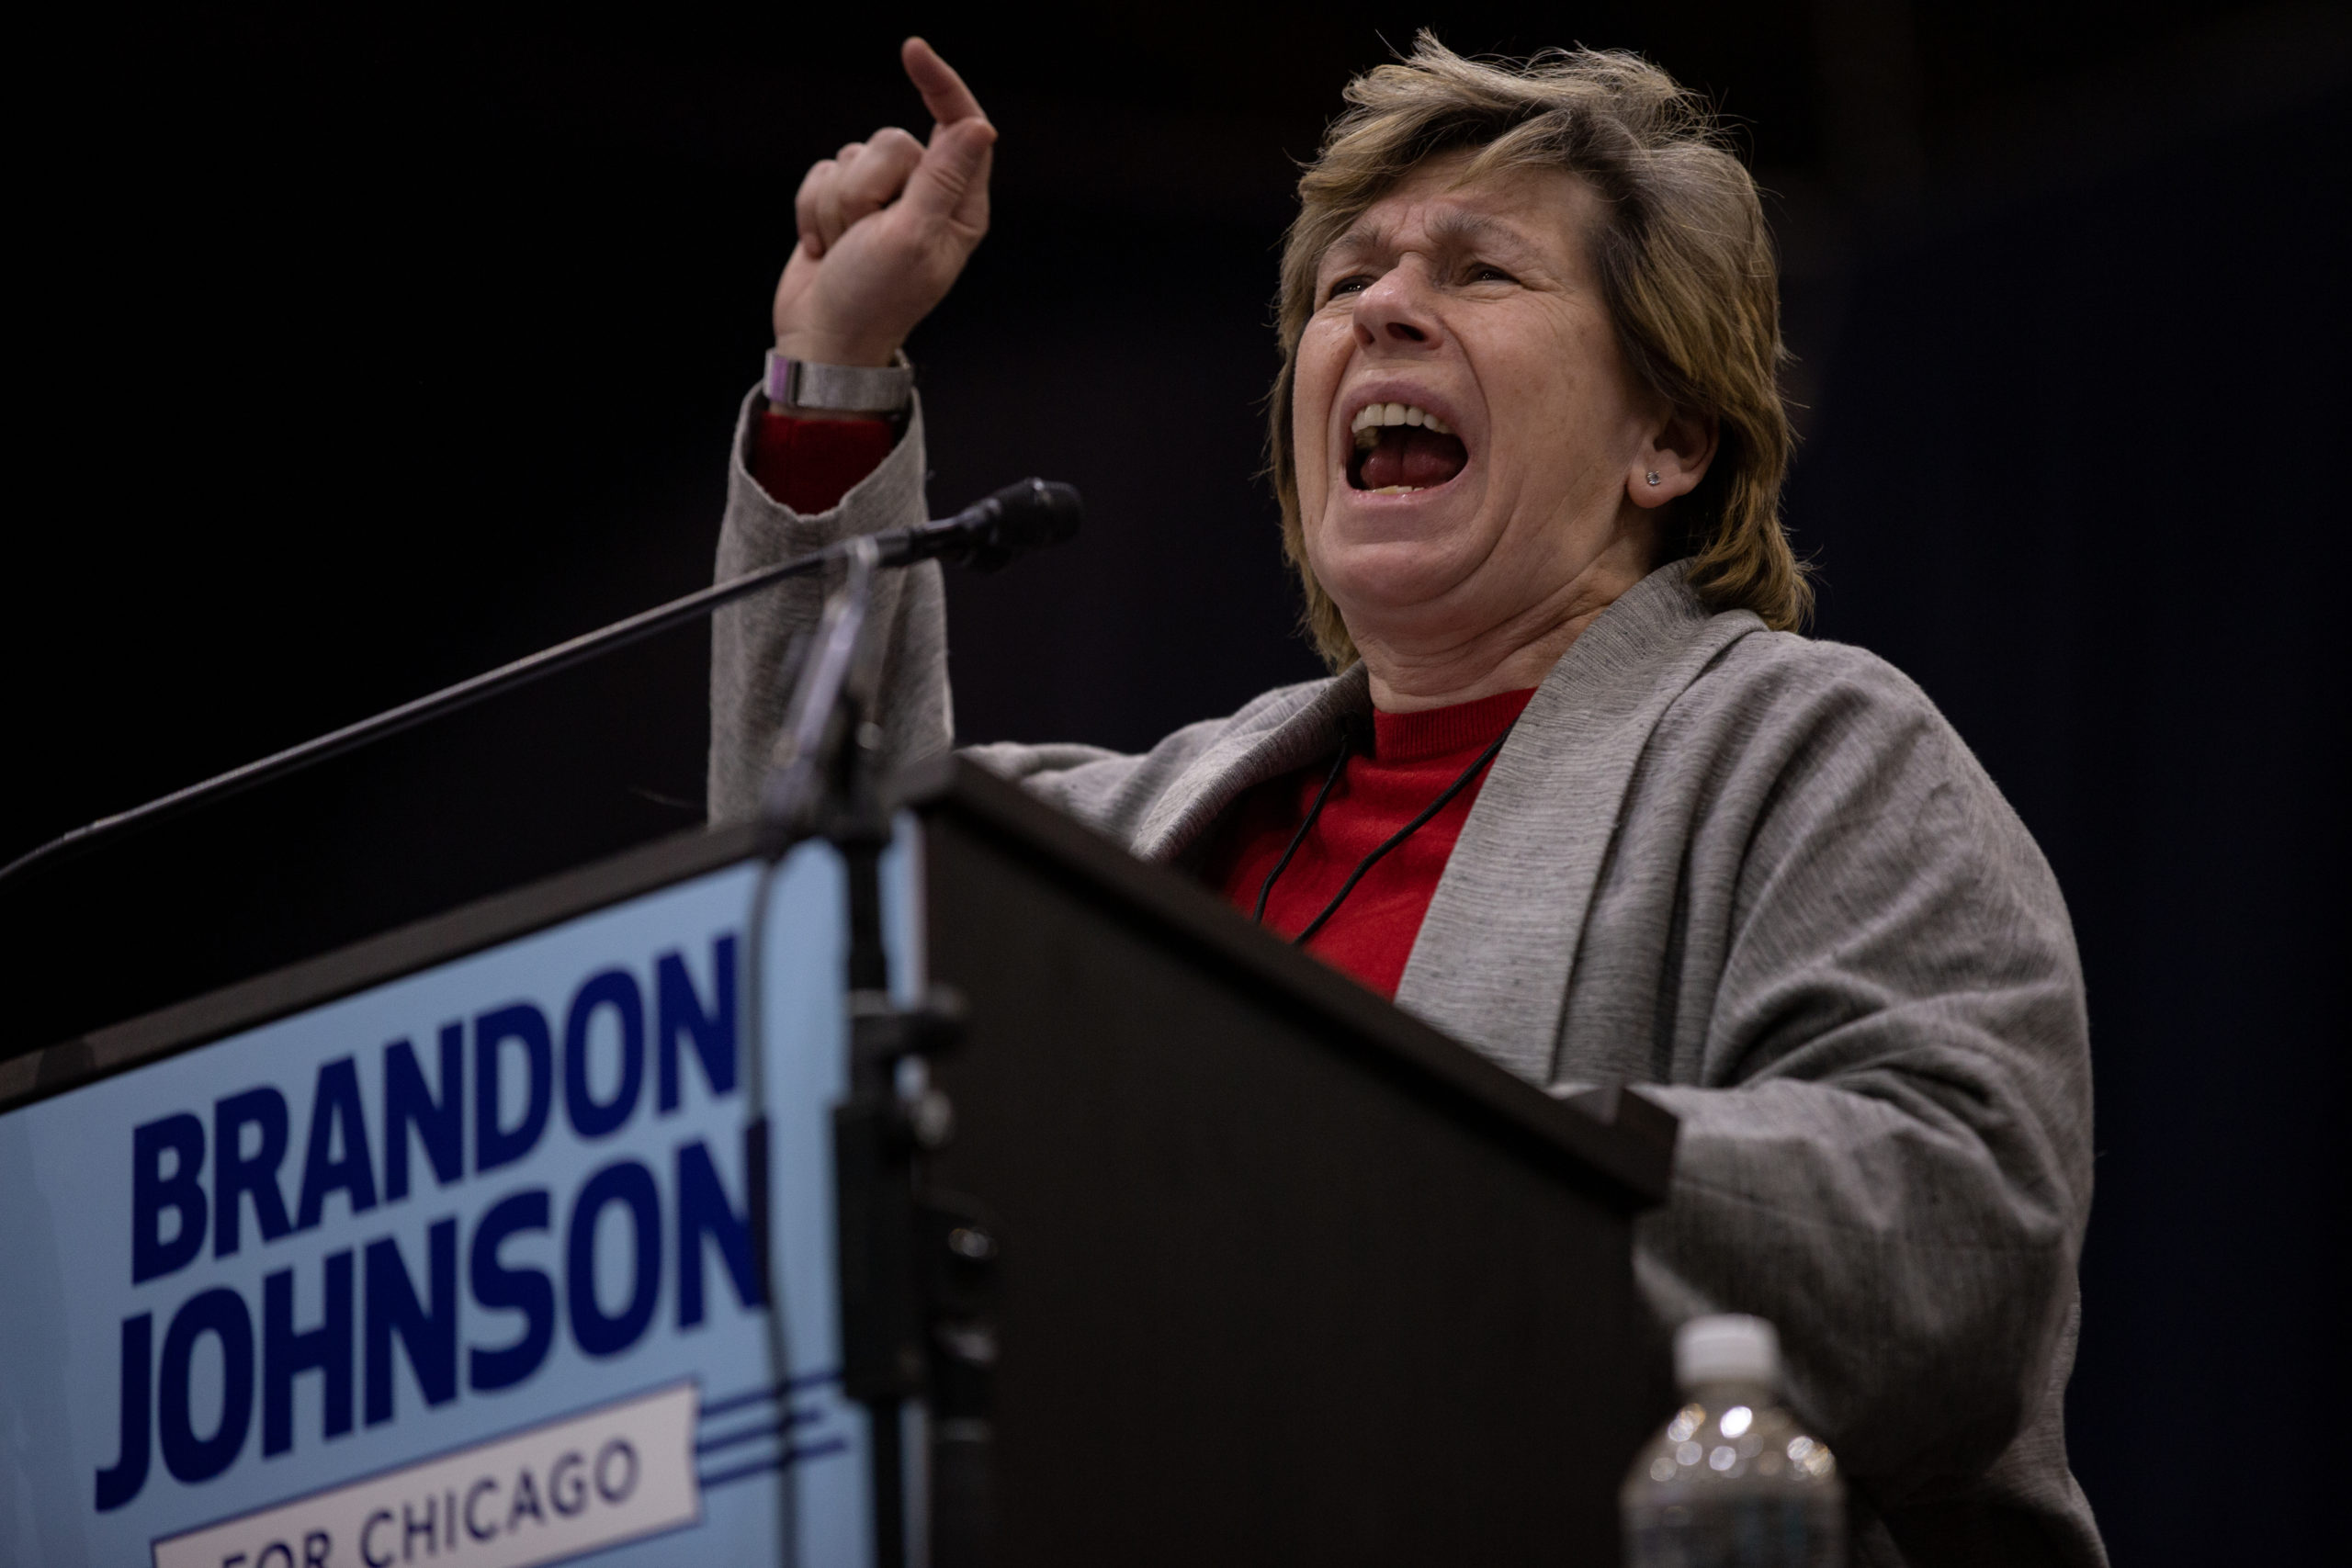 Randi Weingarten, president of the American Federation of Teachers, speaks at a rally for progressive mayoral candidate Brandon Johnson at the UIC Forum on March 30, 2023 in Chicago, Illinois. Johnson is set for a runoff against Paul Vallas on April 4th 2023 for the next Mayor of Chicago. (Photo by Jim Vondruska/Getty Images)